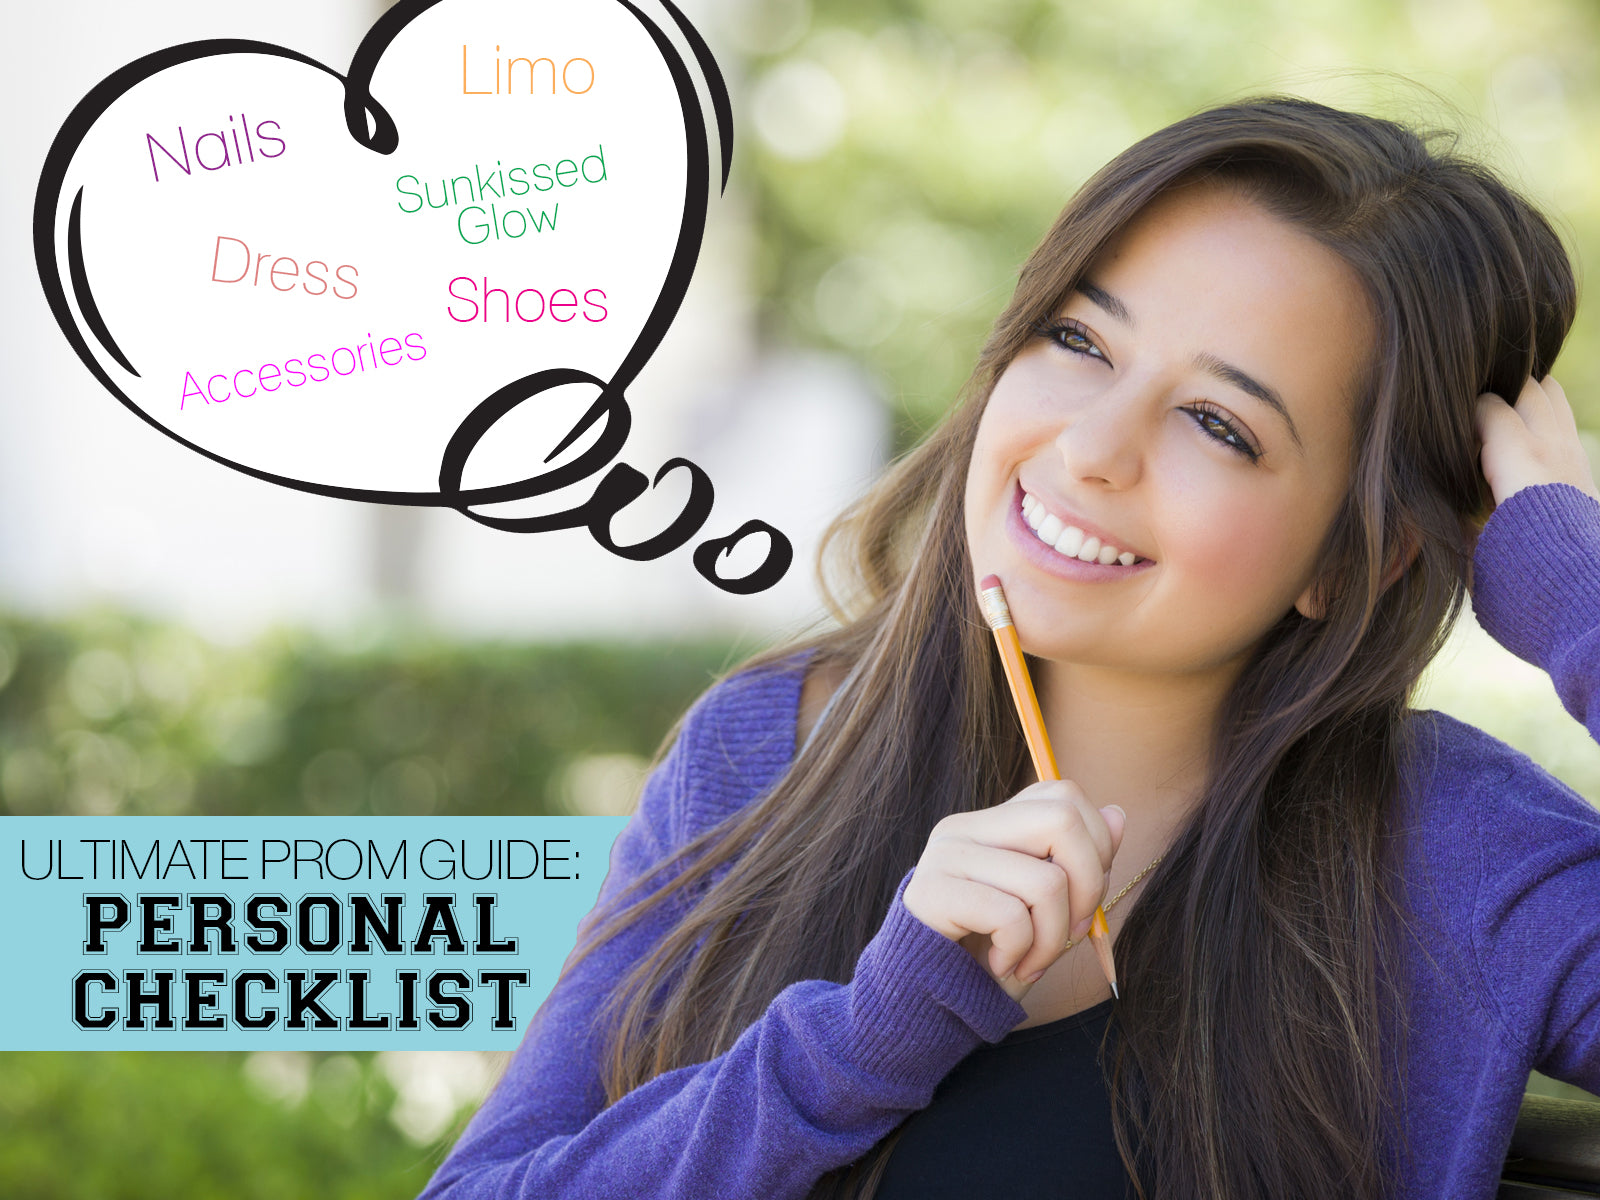 Your Complete Personal Prom Checklist!